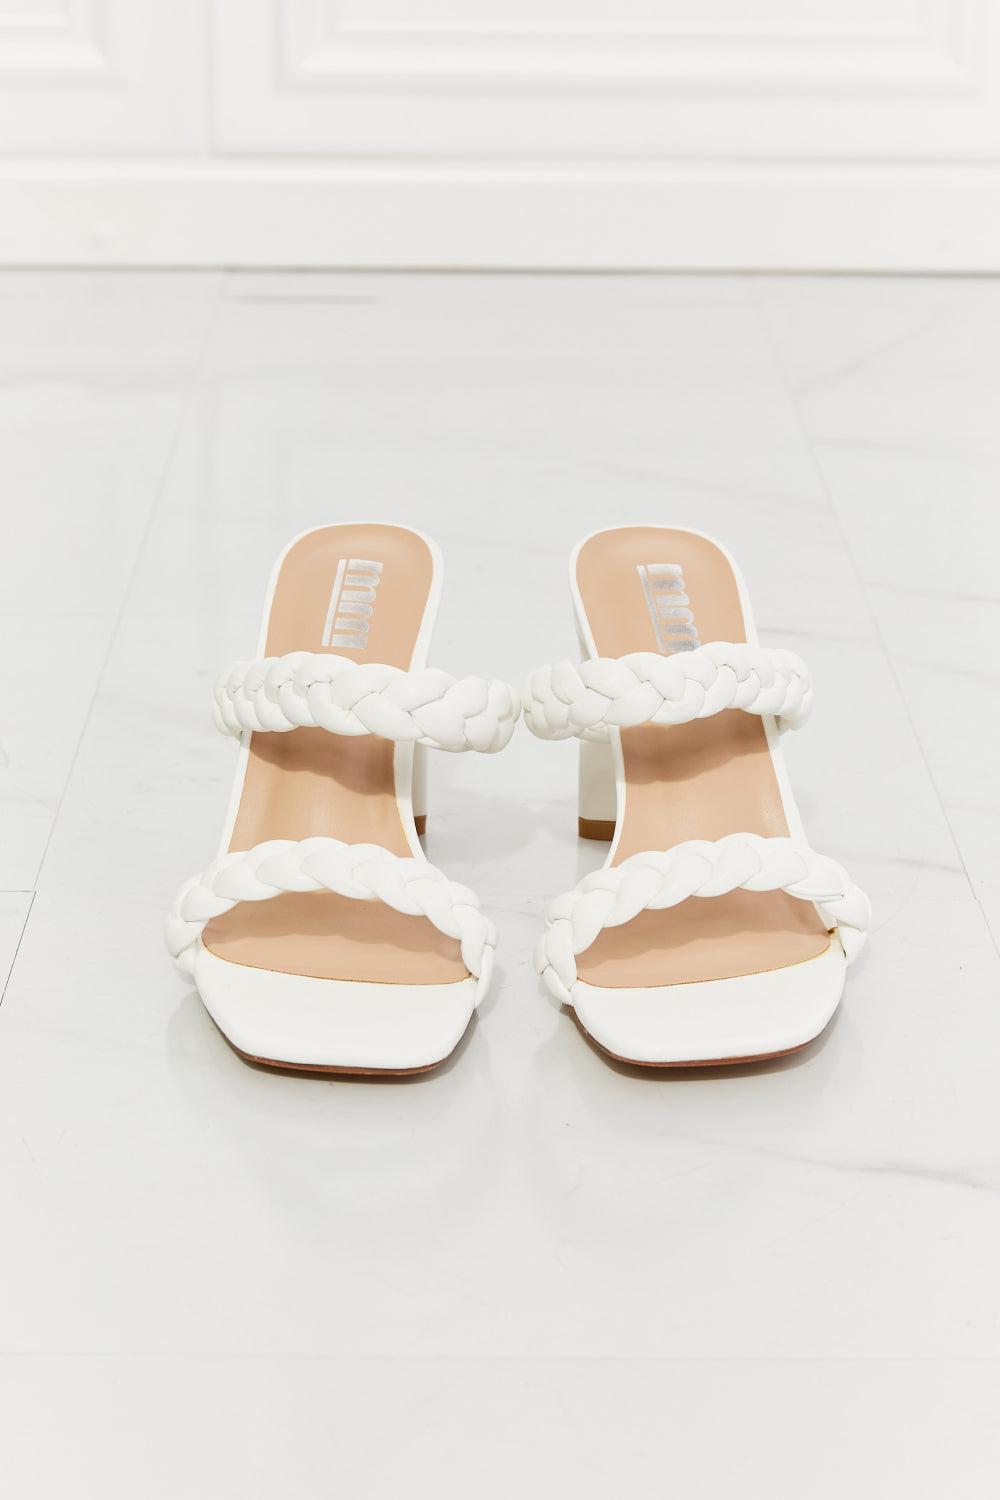 MMShoes In Love Double Braided Block Heel Sandal in White Posh Styles Apparel